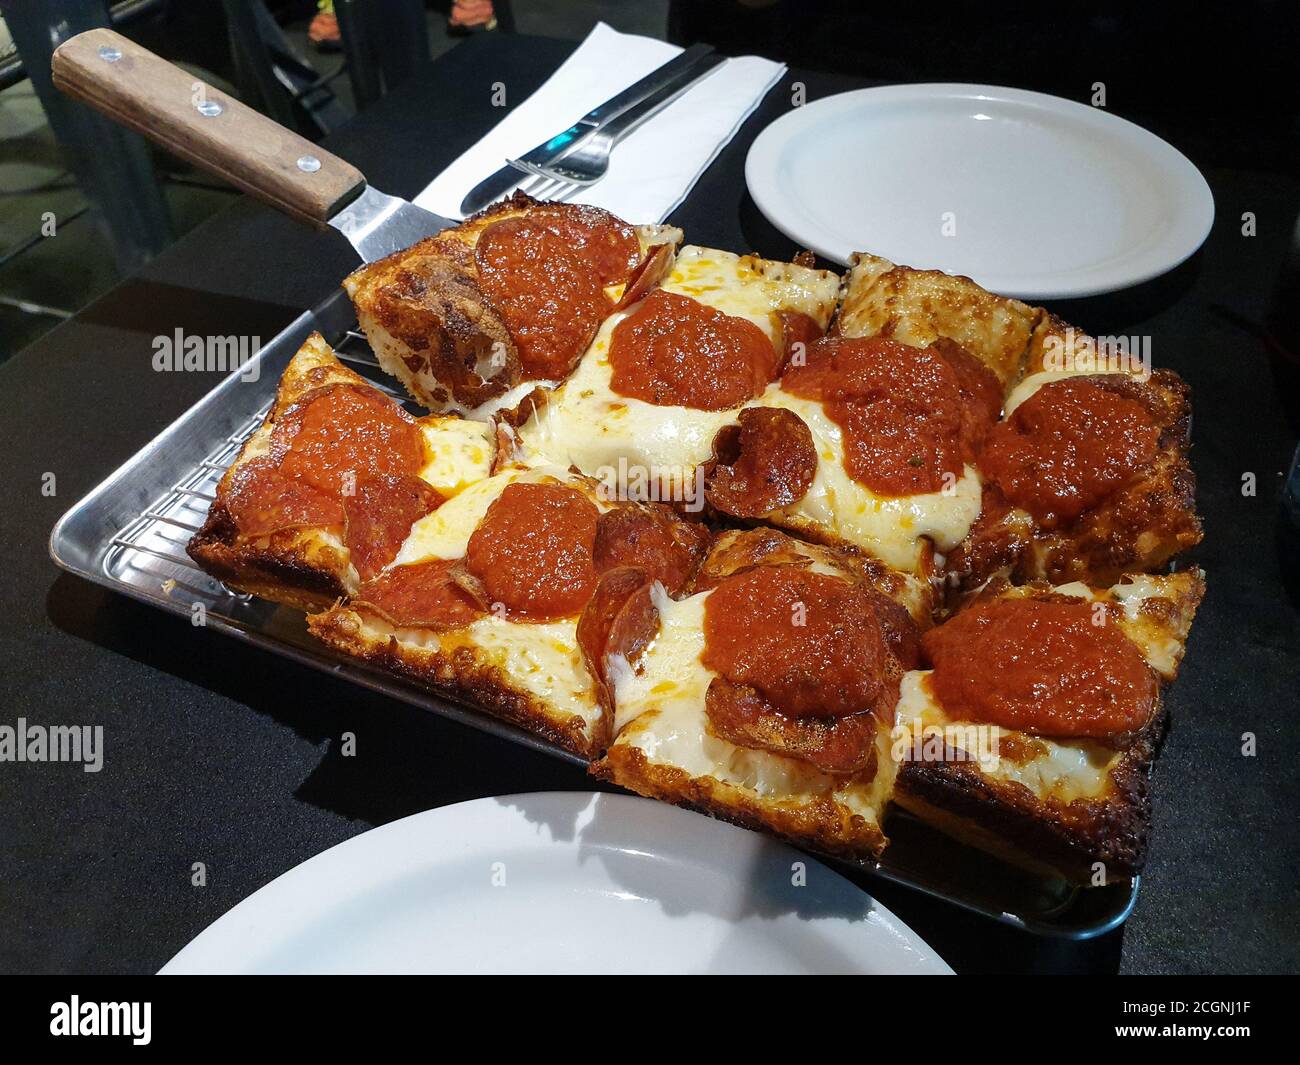 Detroit-style pizza. Rectangular pizza with a thick crisp crust and toppings such as pepperoni. Baked in a square pan, which is industrial parts tray. Stock Photo